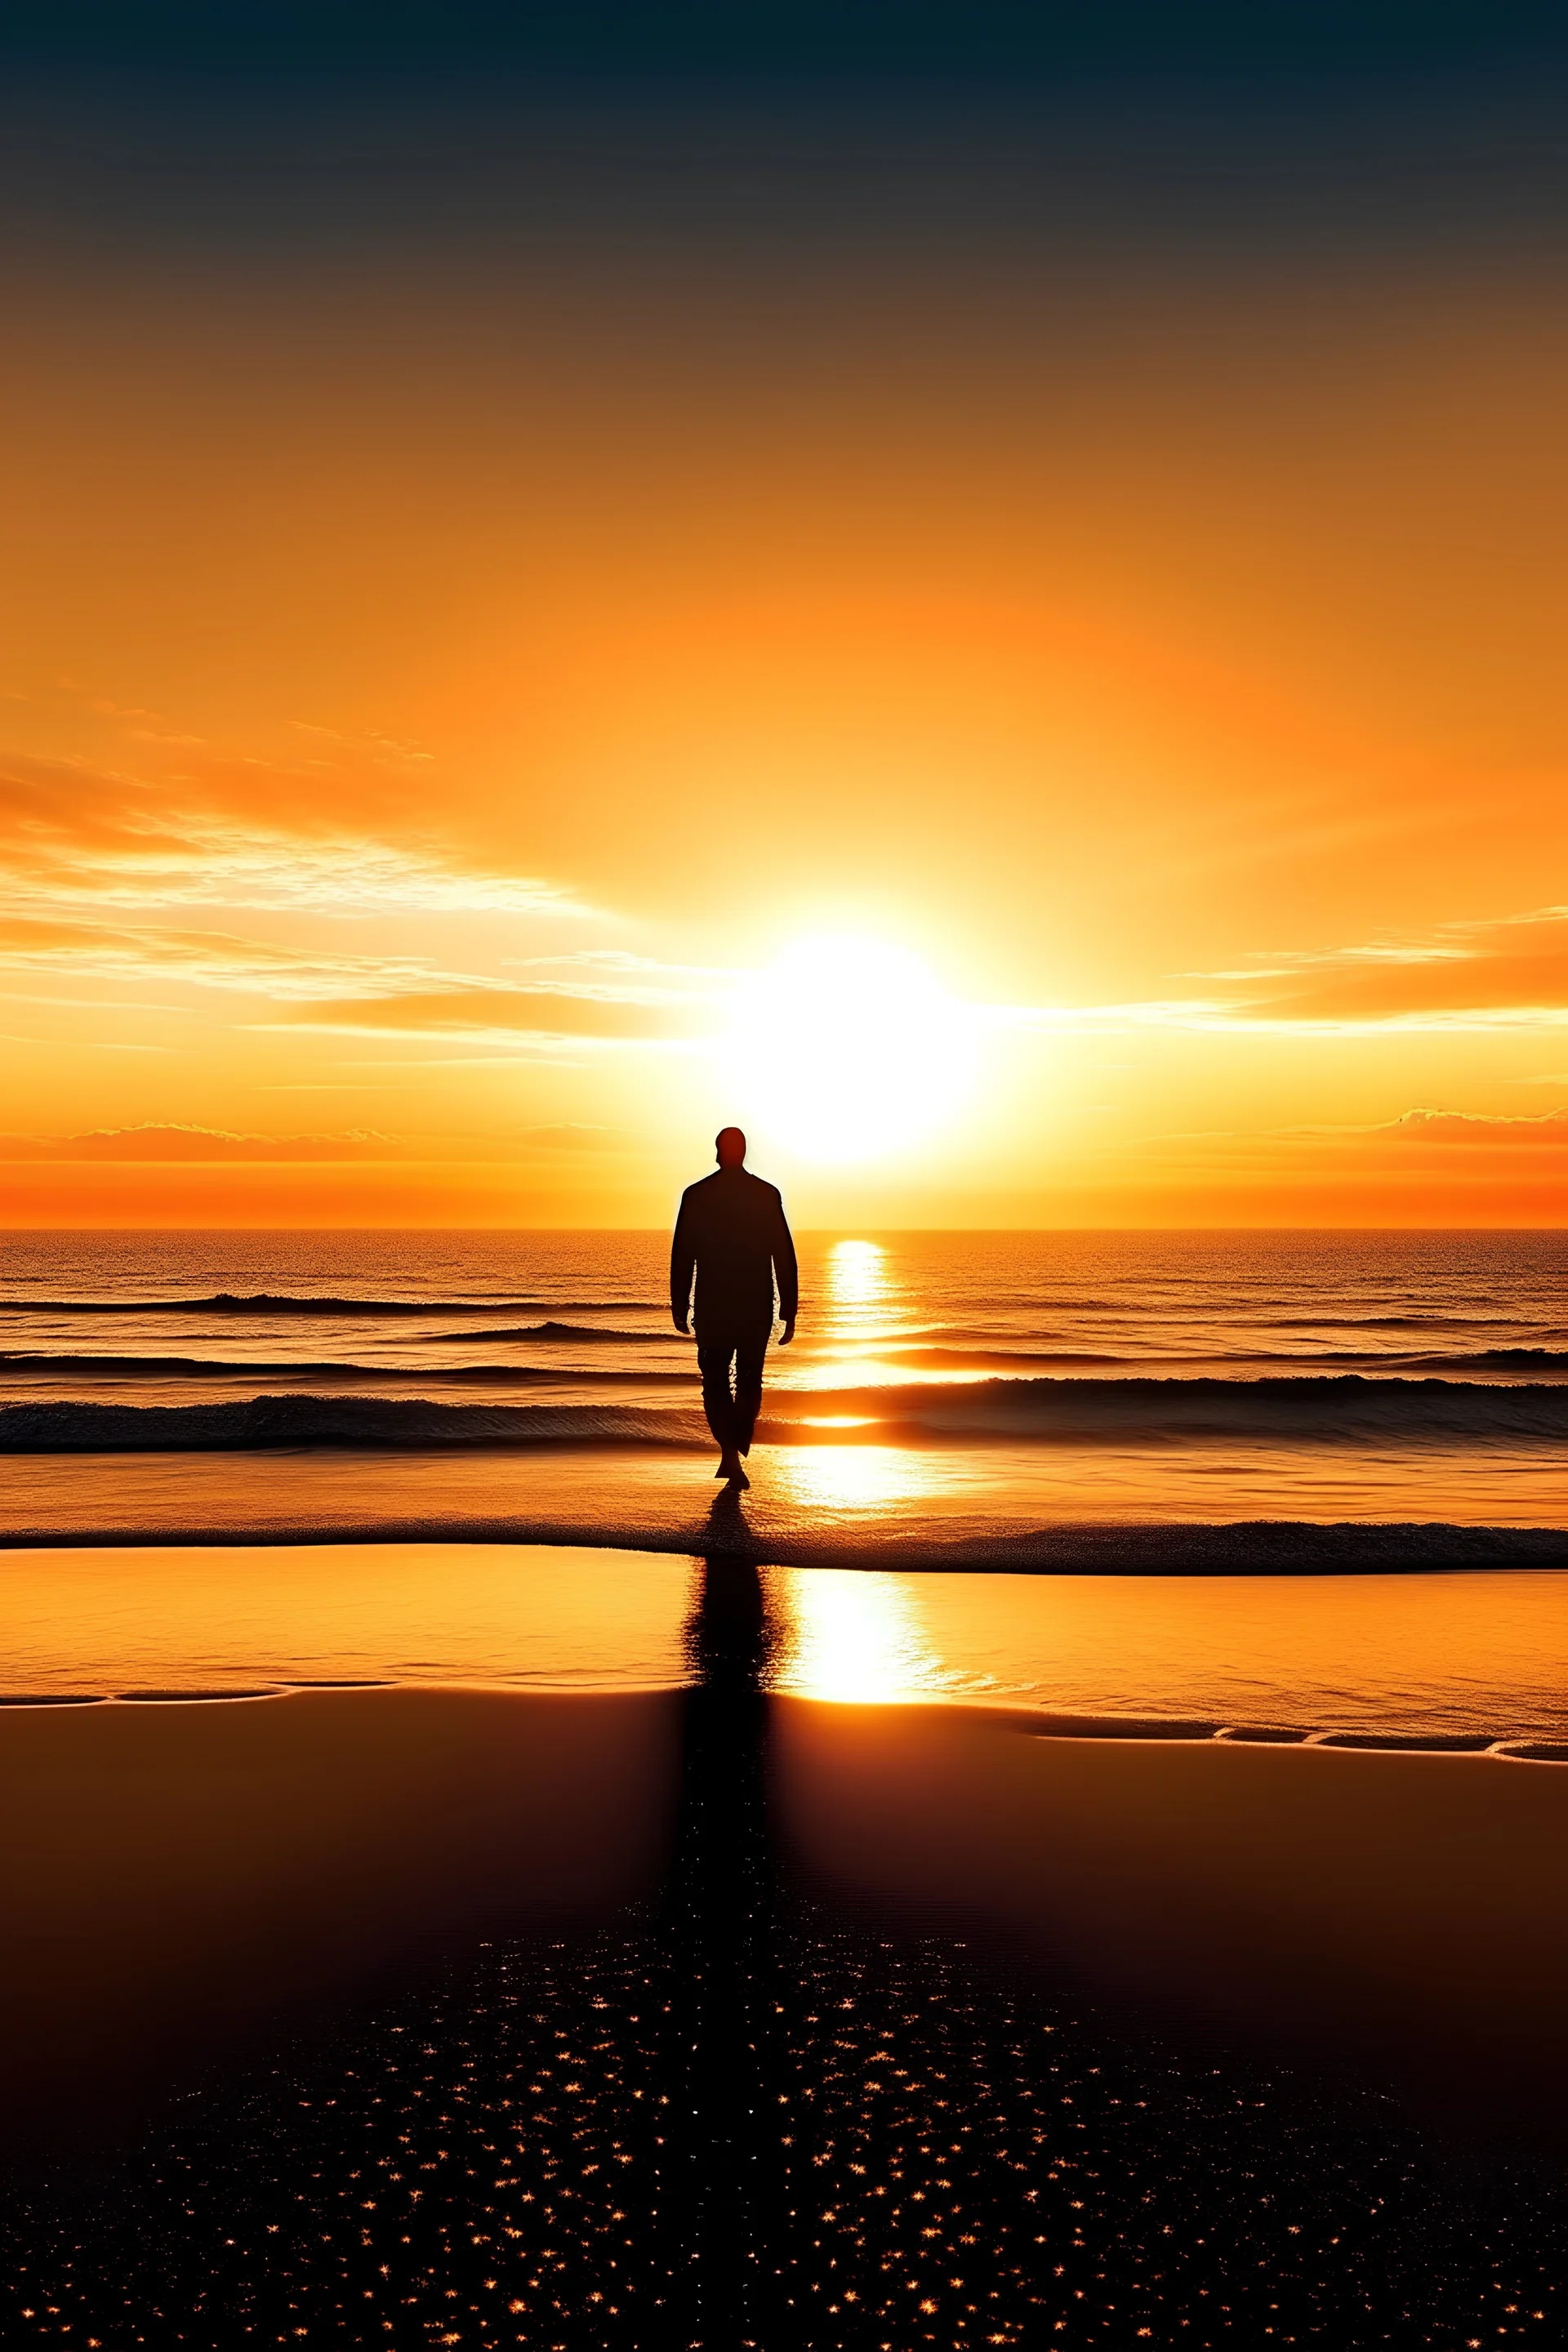 Create an image of a sunrise over the sea and a man walking